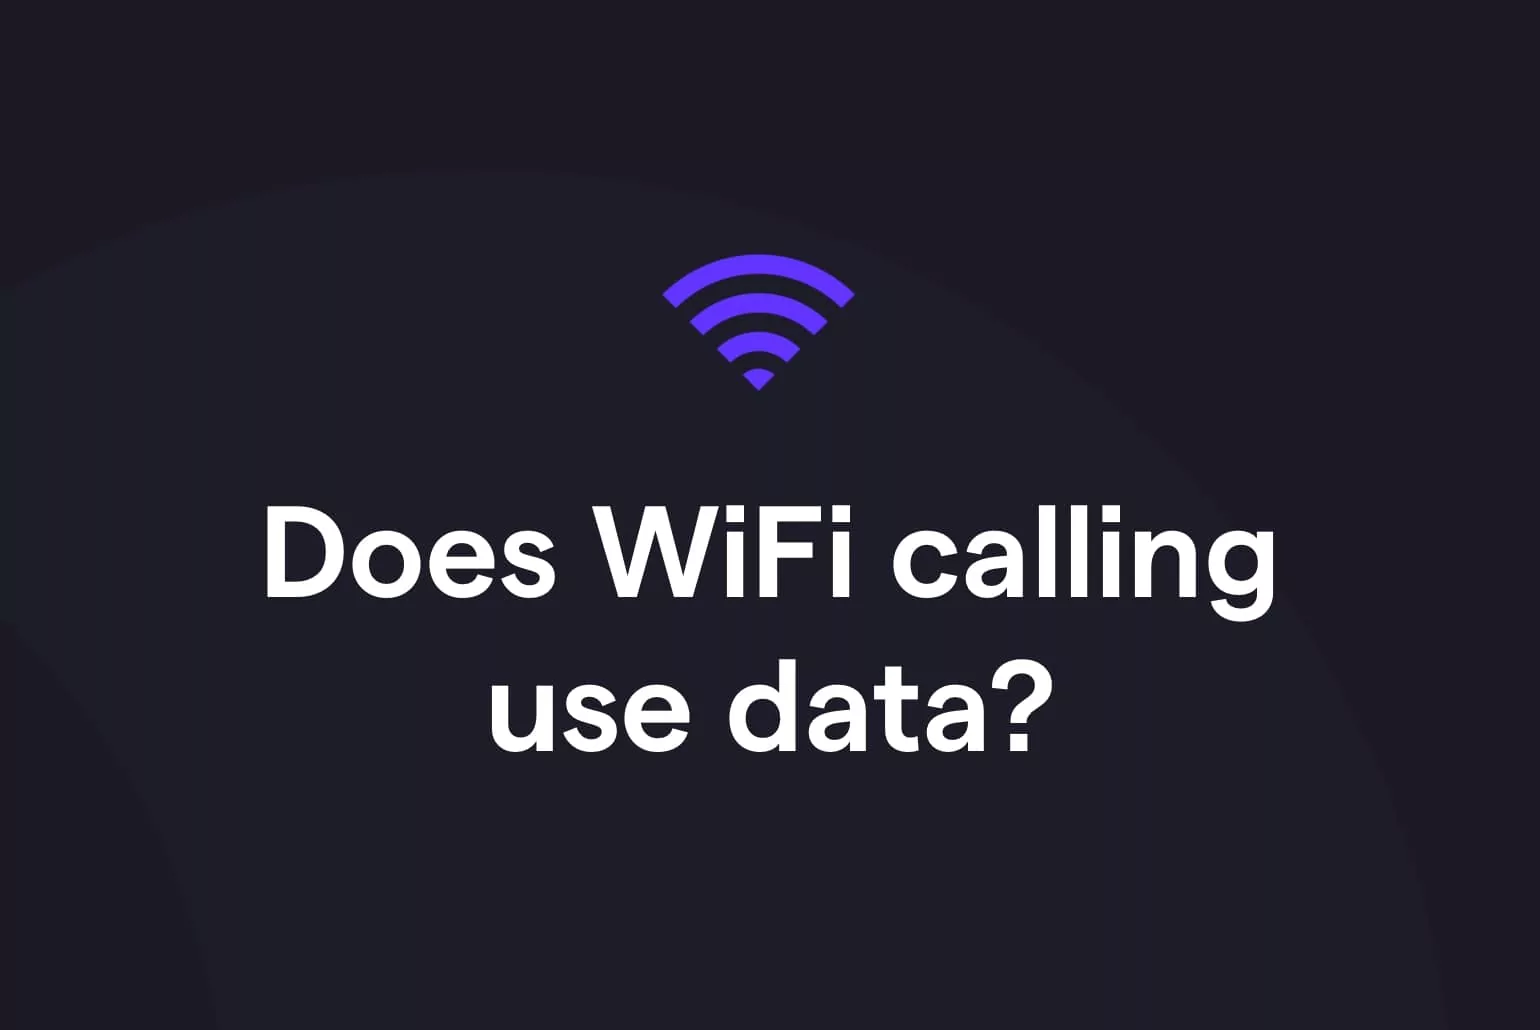 Does WiFi calling use data?